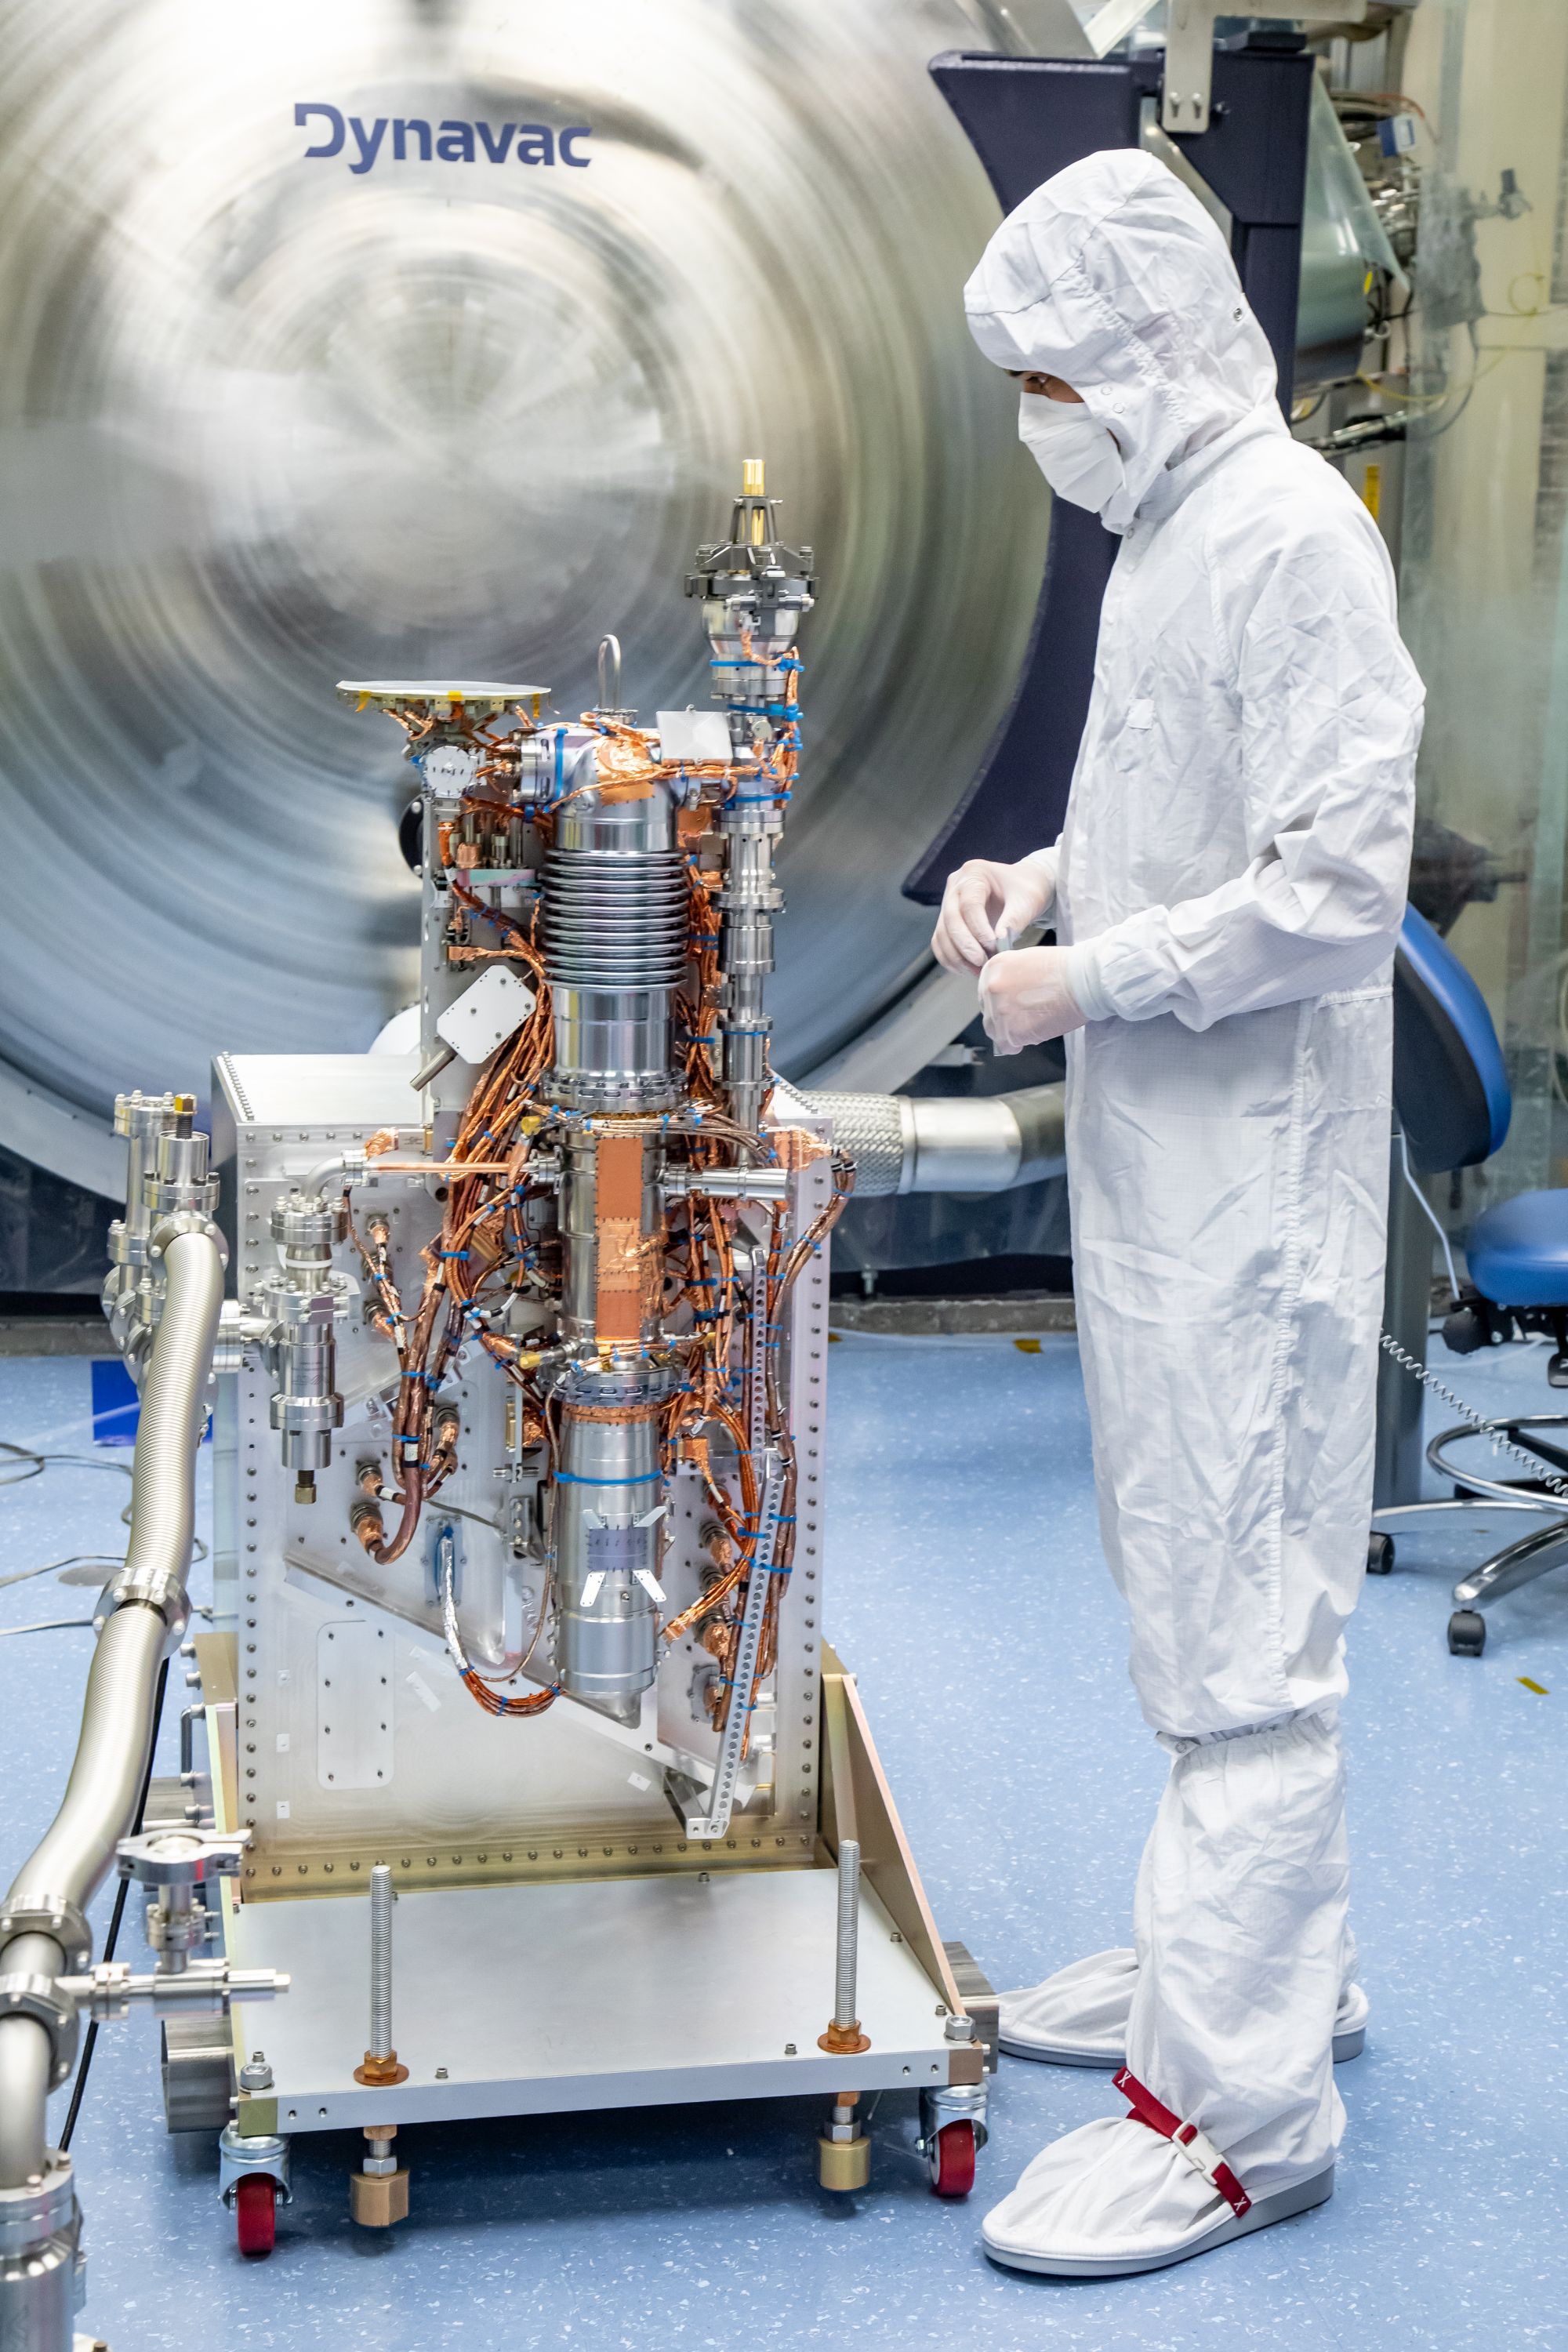 SwRI recently completed assembly and testing of the Mass Spectrometer for Planetary Exploration (MASPEX) to be carried by the Europa Clipper mission. It will search for organic material in Europa’s oceans. Credit: Southwest Research Institute.